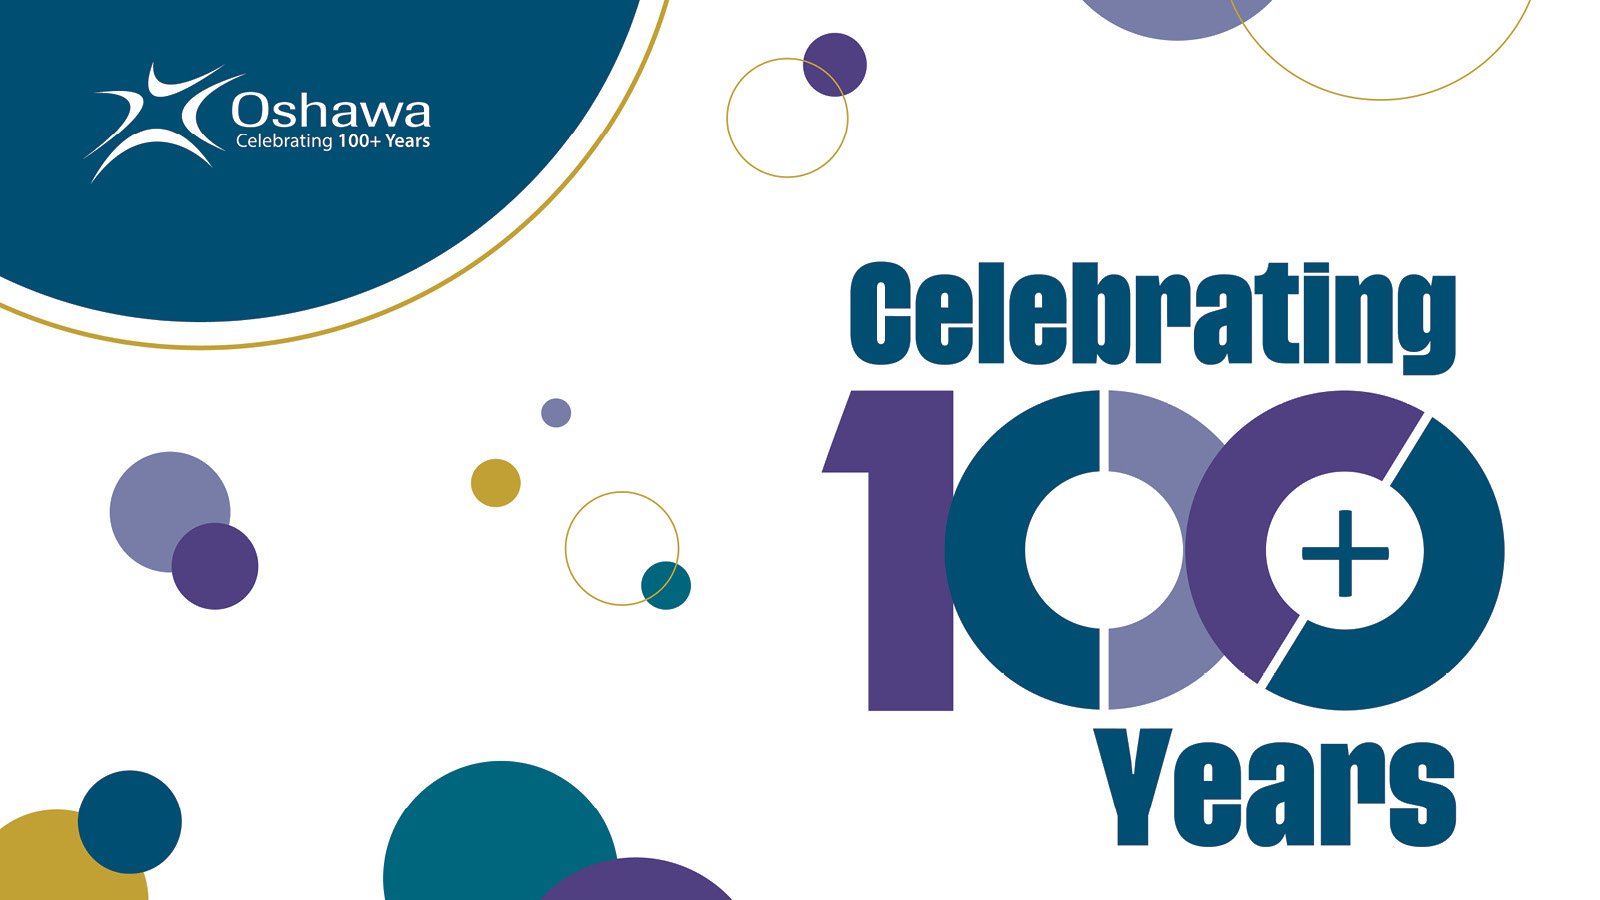 City of Oshawa logo and text Celebrating 100+ Year on white background with circles and dots of purple, teal and gold